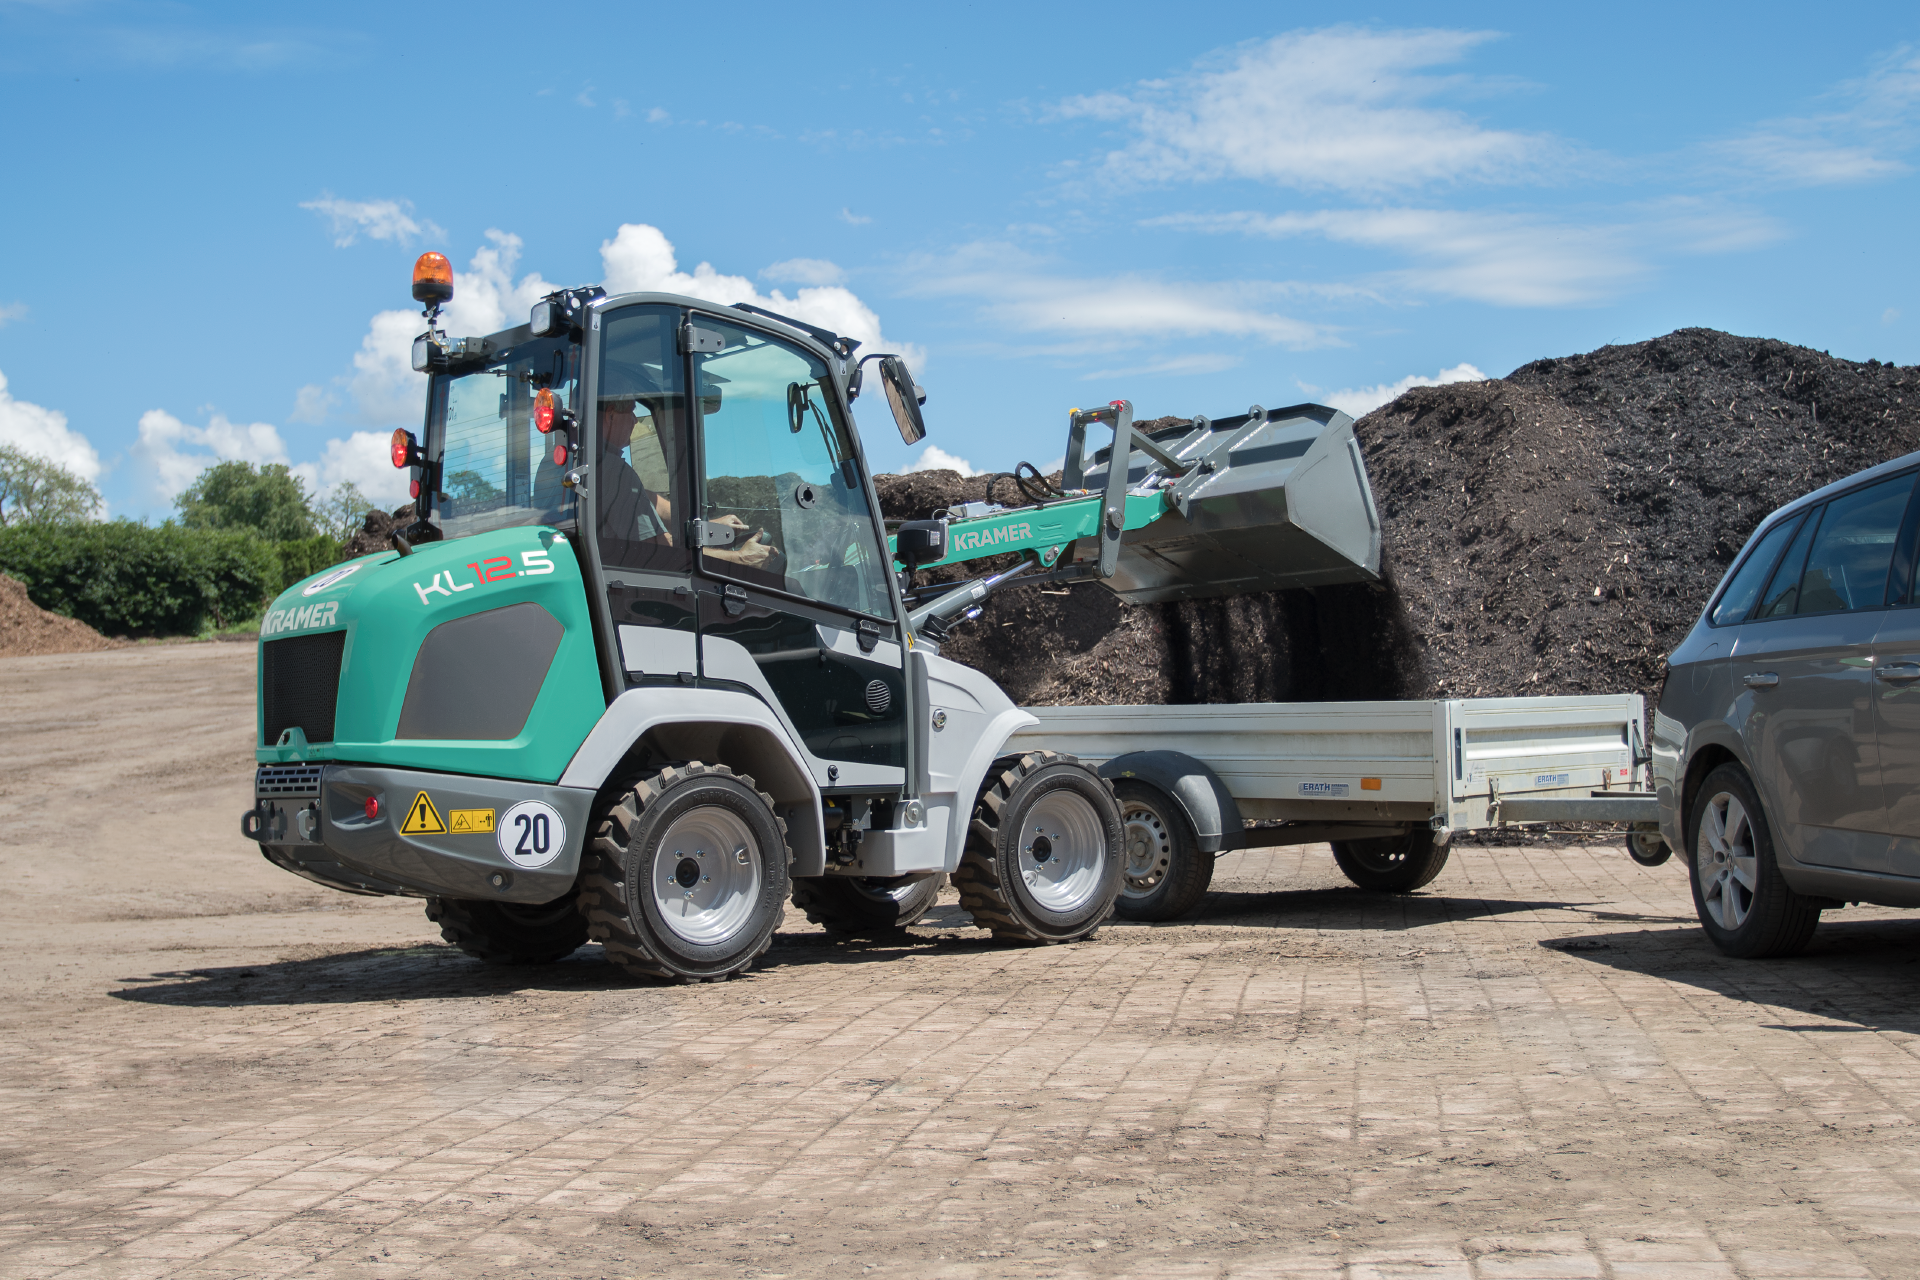 The compact KL12.5 while loading compost on a trailer.